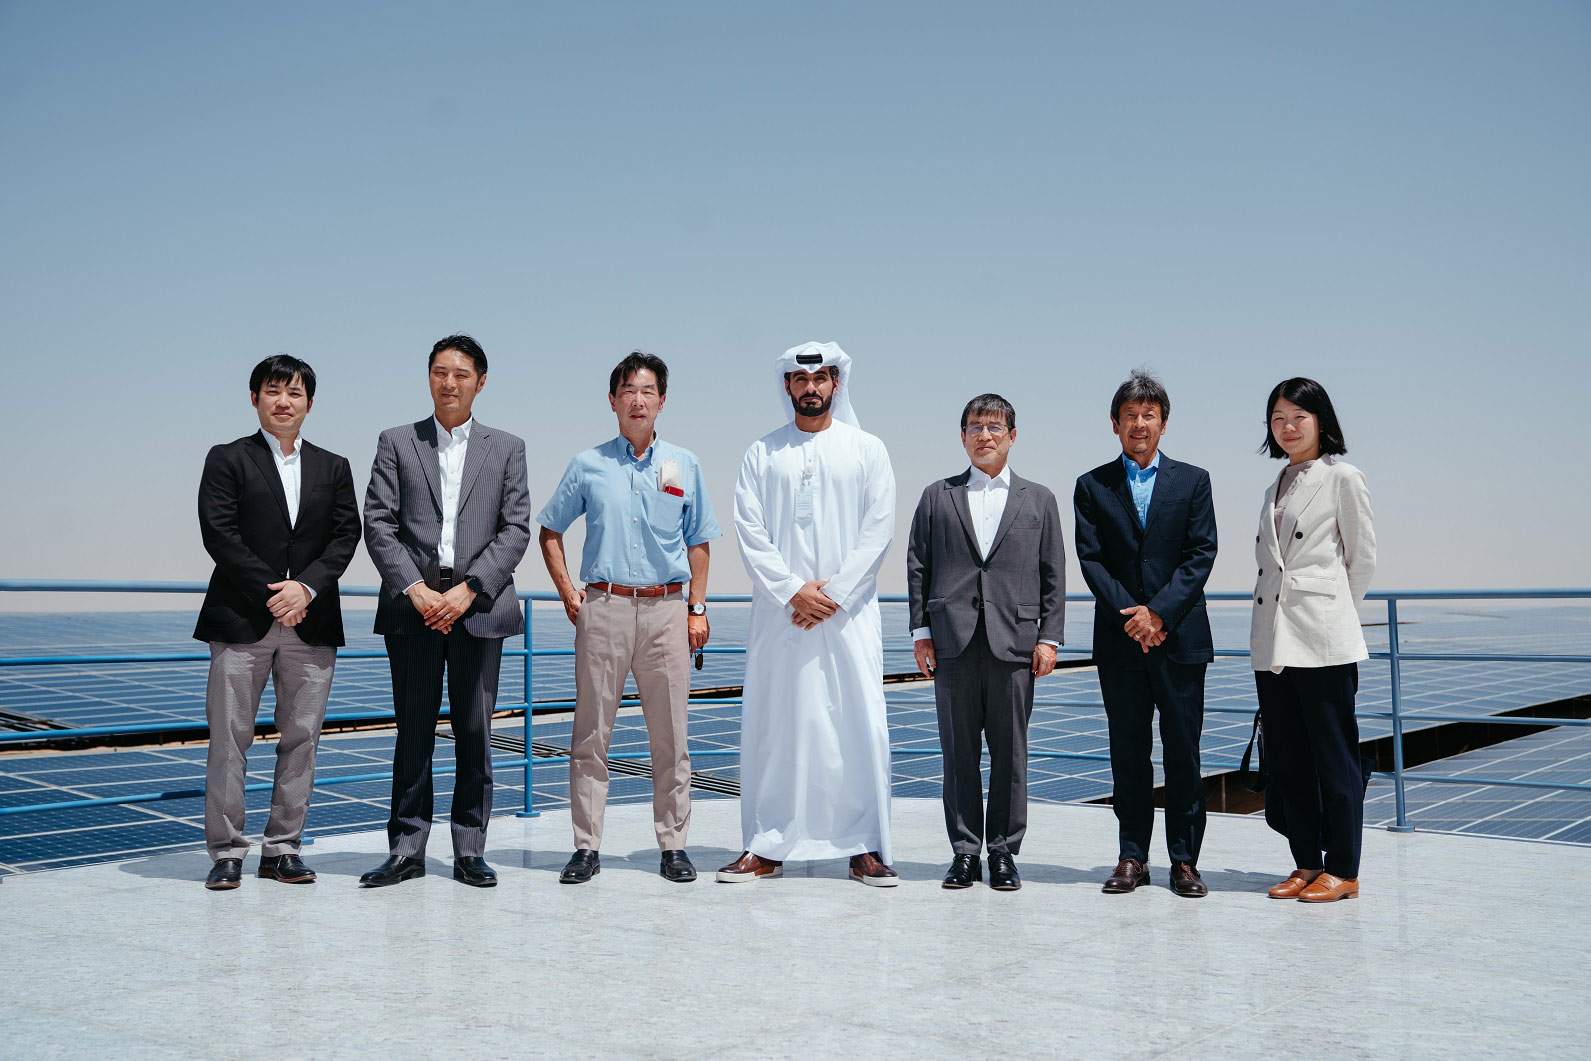 Japanese Ambassador to the UAE visits Noor Abu Dhabi - one of the largest solar plants in the world